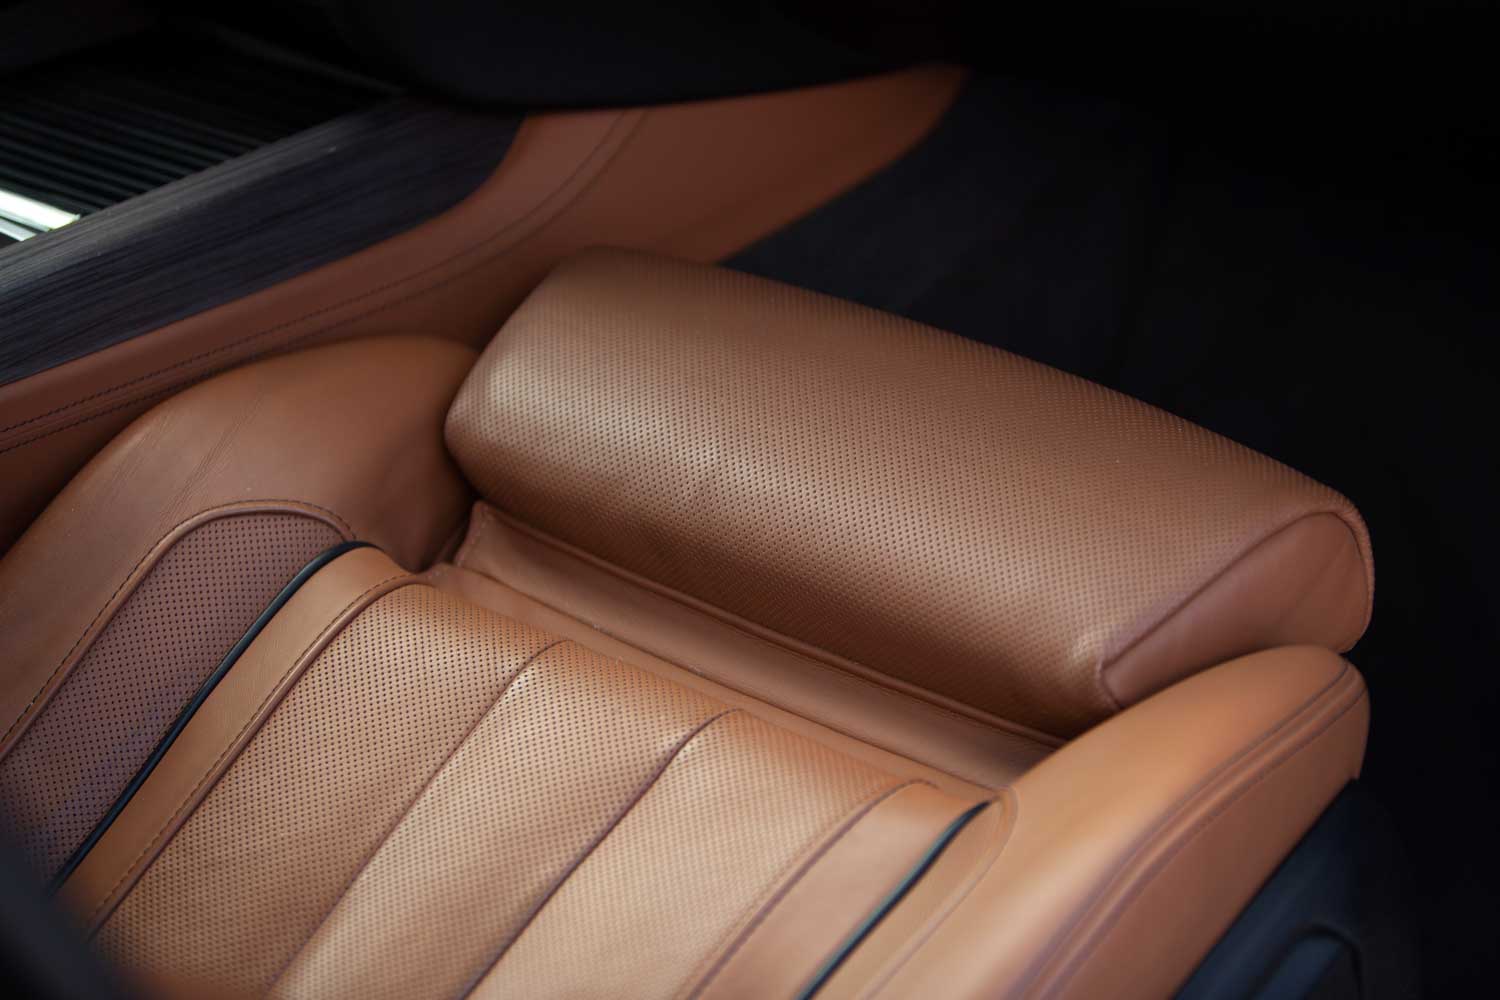 Luxury vehicle interior with brown perforated leather seats